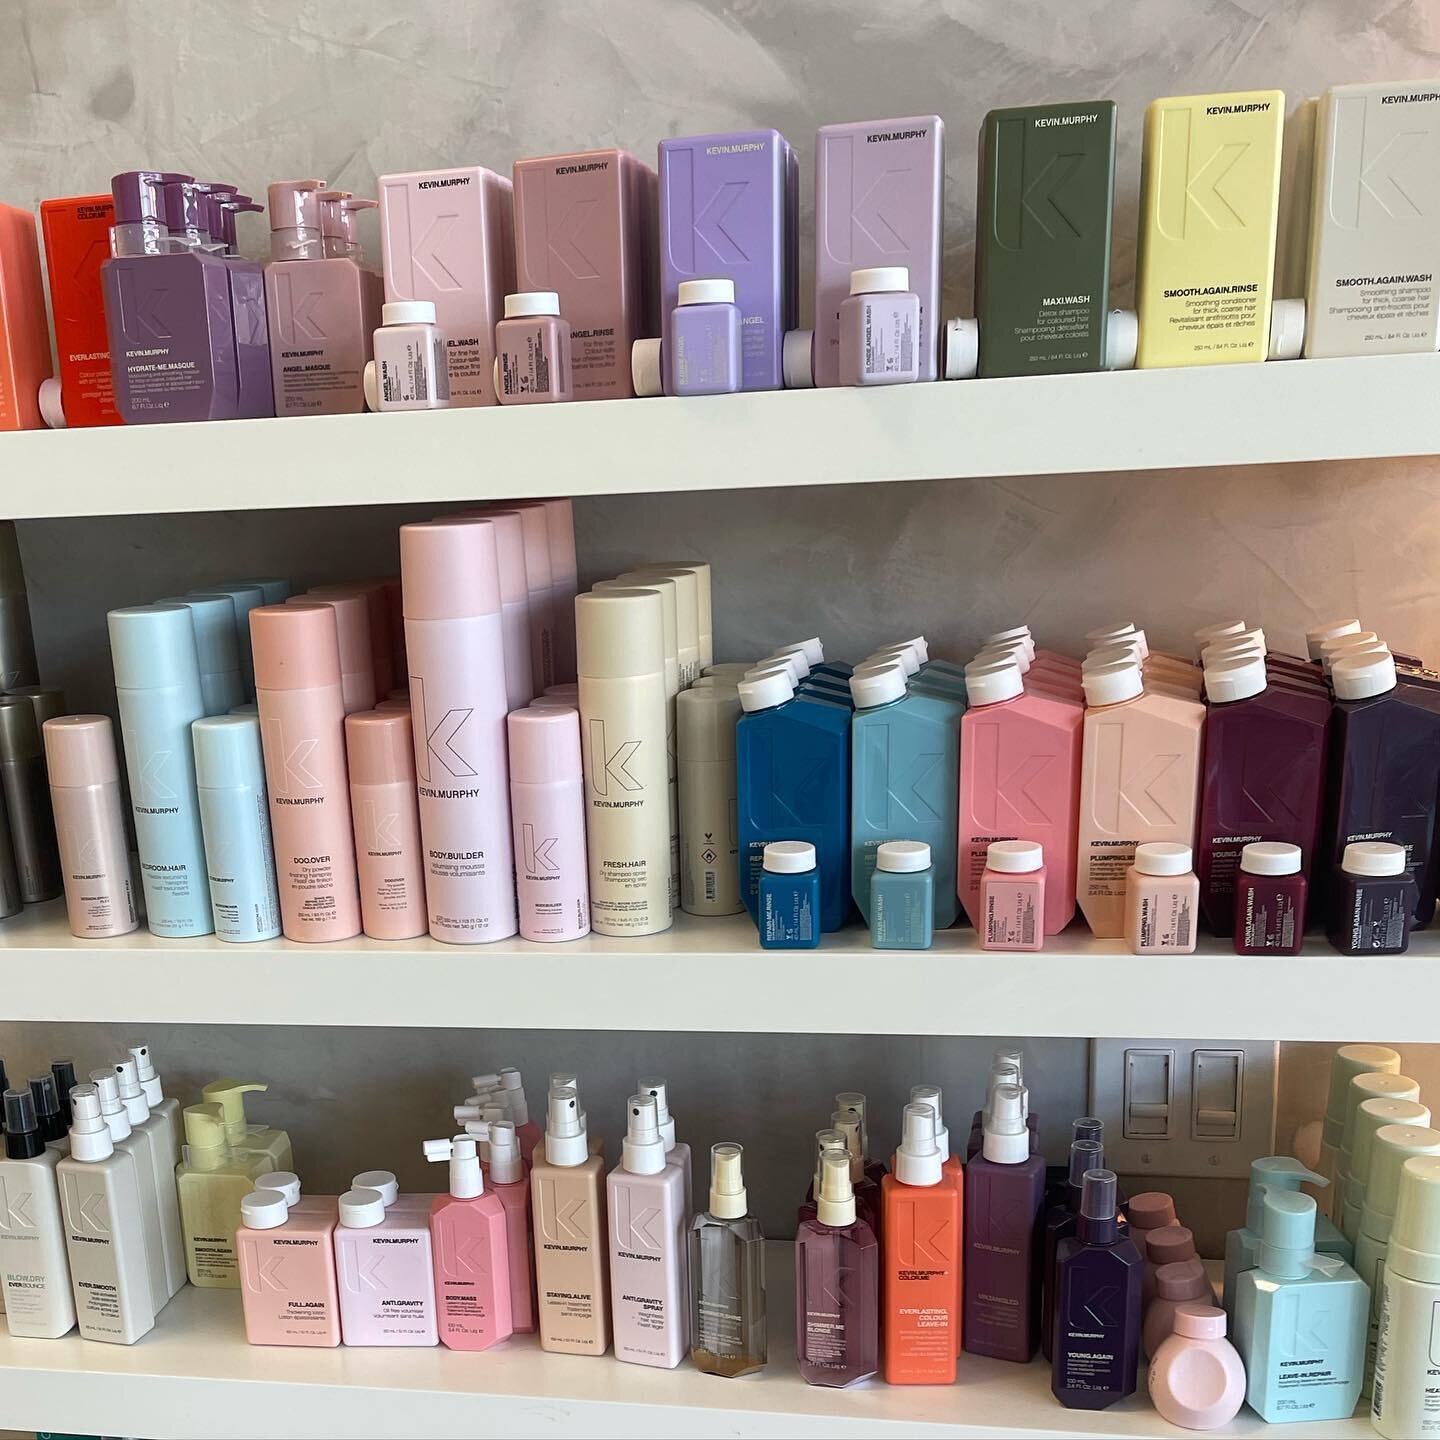 Give me all the @kevin.murphy #hair #hairstylist #scottsdale #scottsdaleaz #arizona #scottsdalesalon #salon #hairtransformation #hairtransformation #hairgoals #hairproducts #haircare #hairproductsthatwork #goals #products #hairspray #mouse #spray #sh